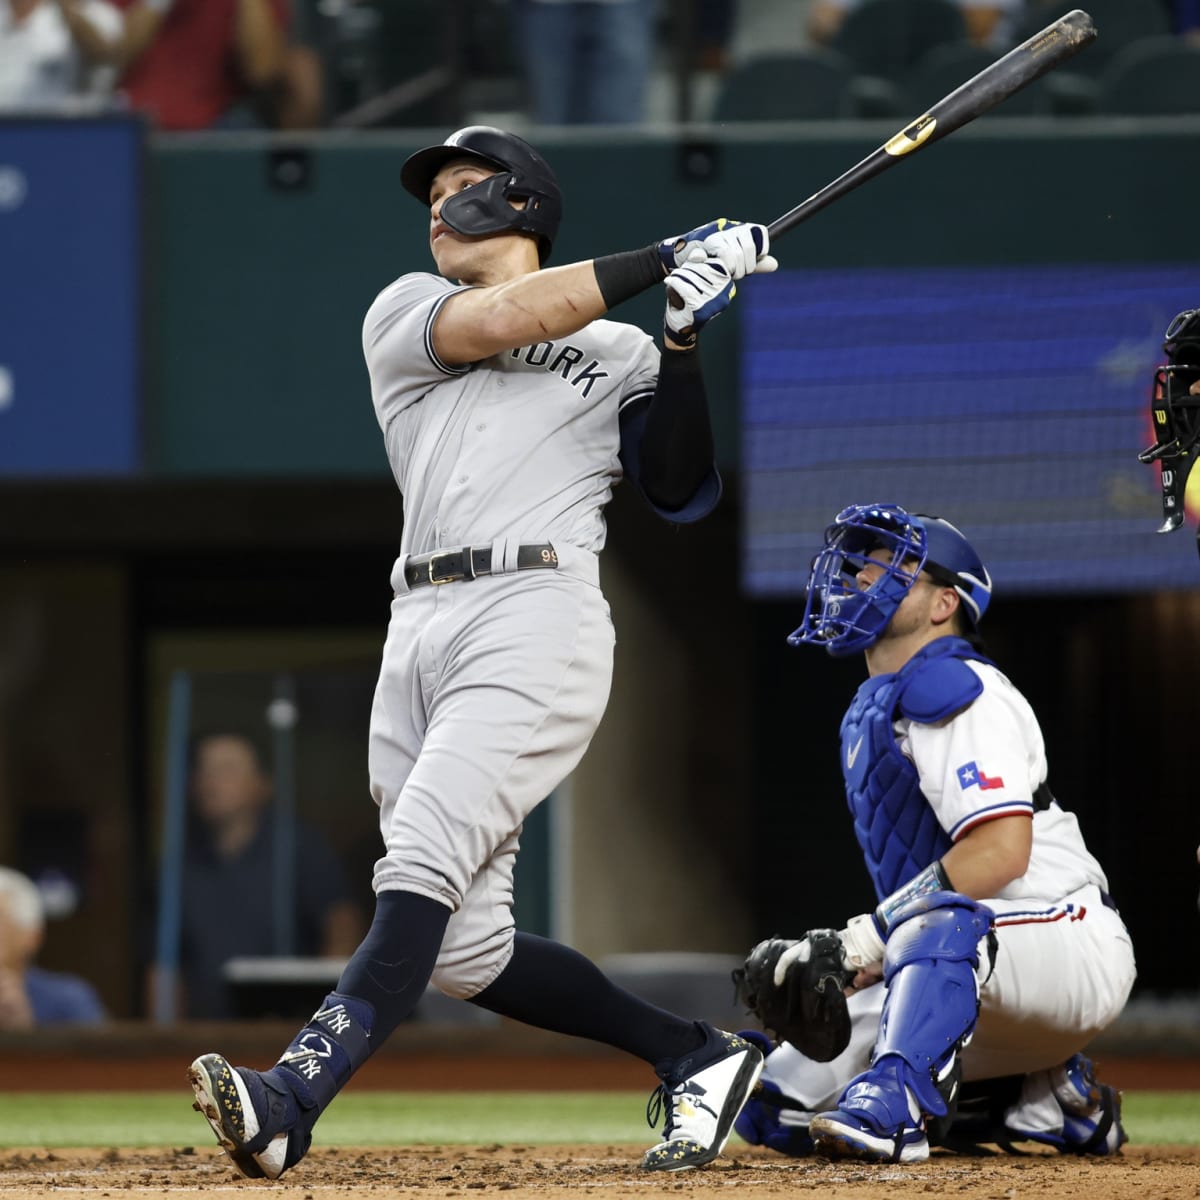 Aaron Judge hits American League record 62nd home run, passing